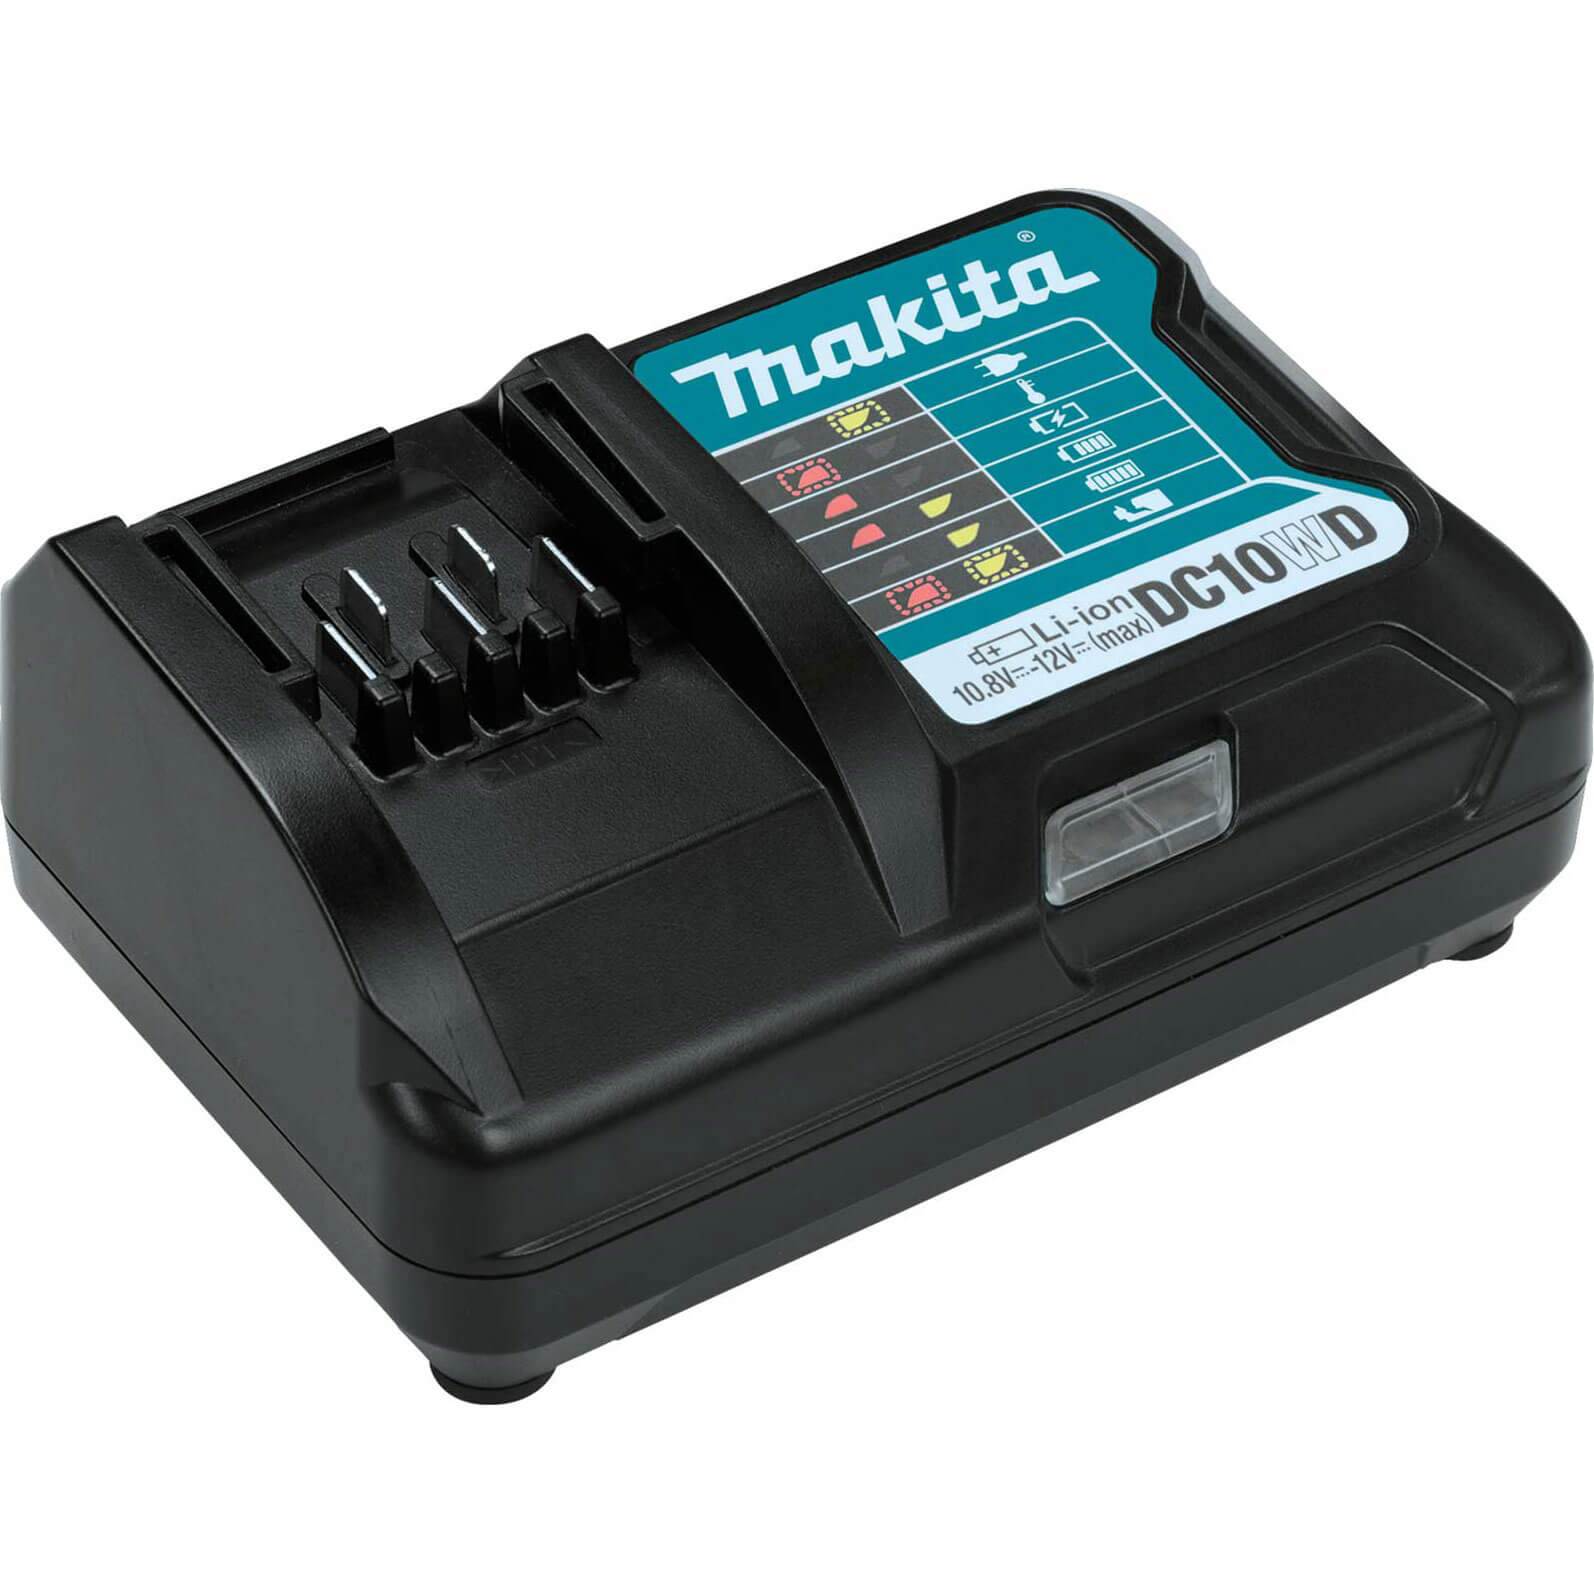 Photos - Power Tool Battery Makita DC10WD 12v CXT Battery Charger 240v 